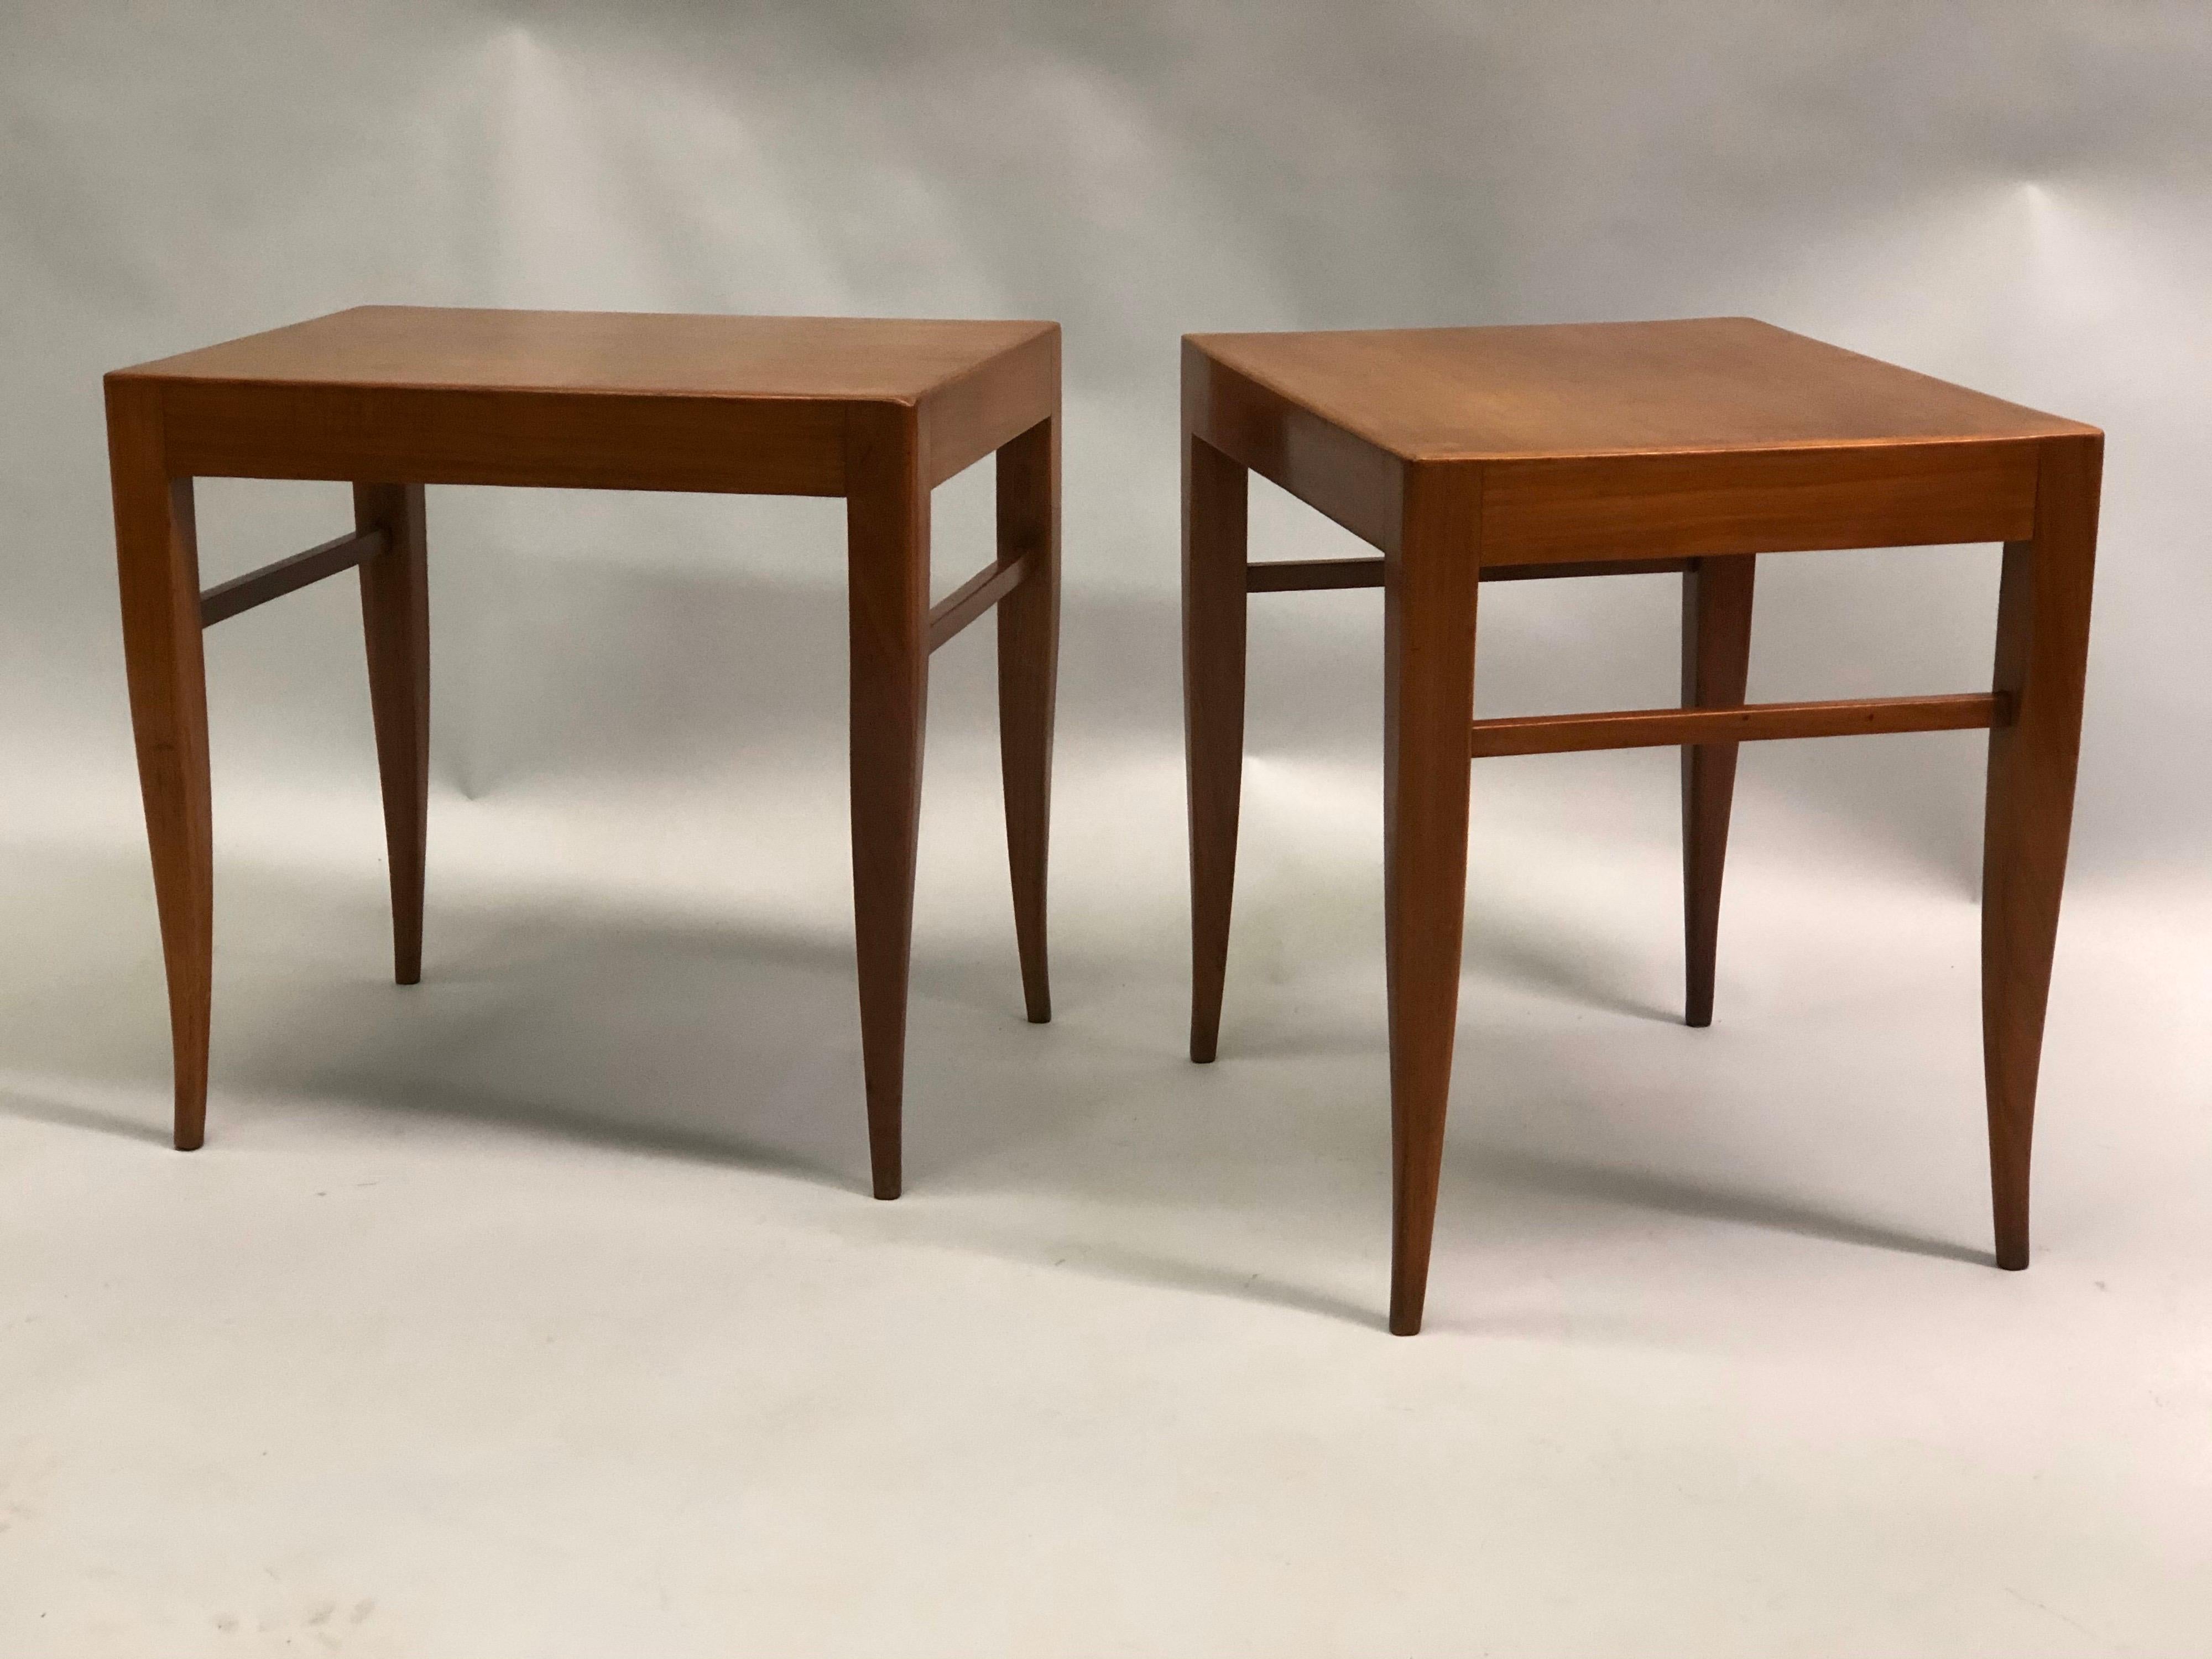 Mid-Century Modern Pair of Italian Modern Craftsman Carved Cherry Wood Benches, Gio Ponti, c. 1954 For Sale